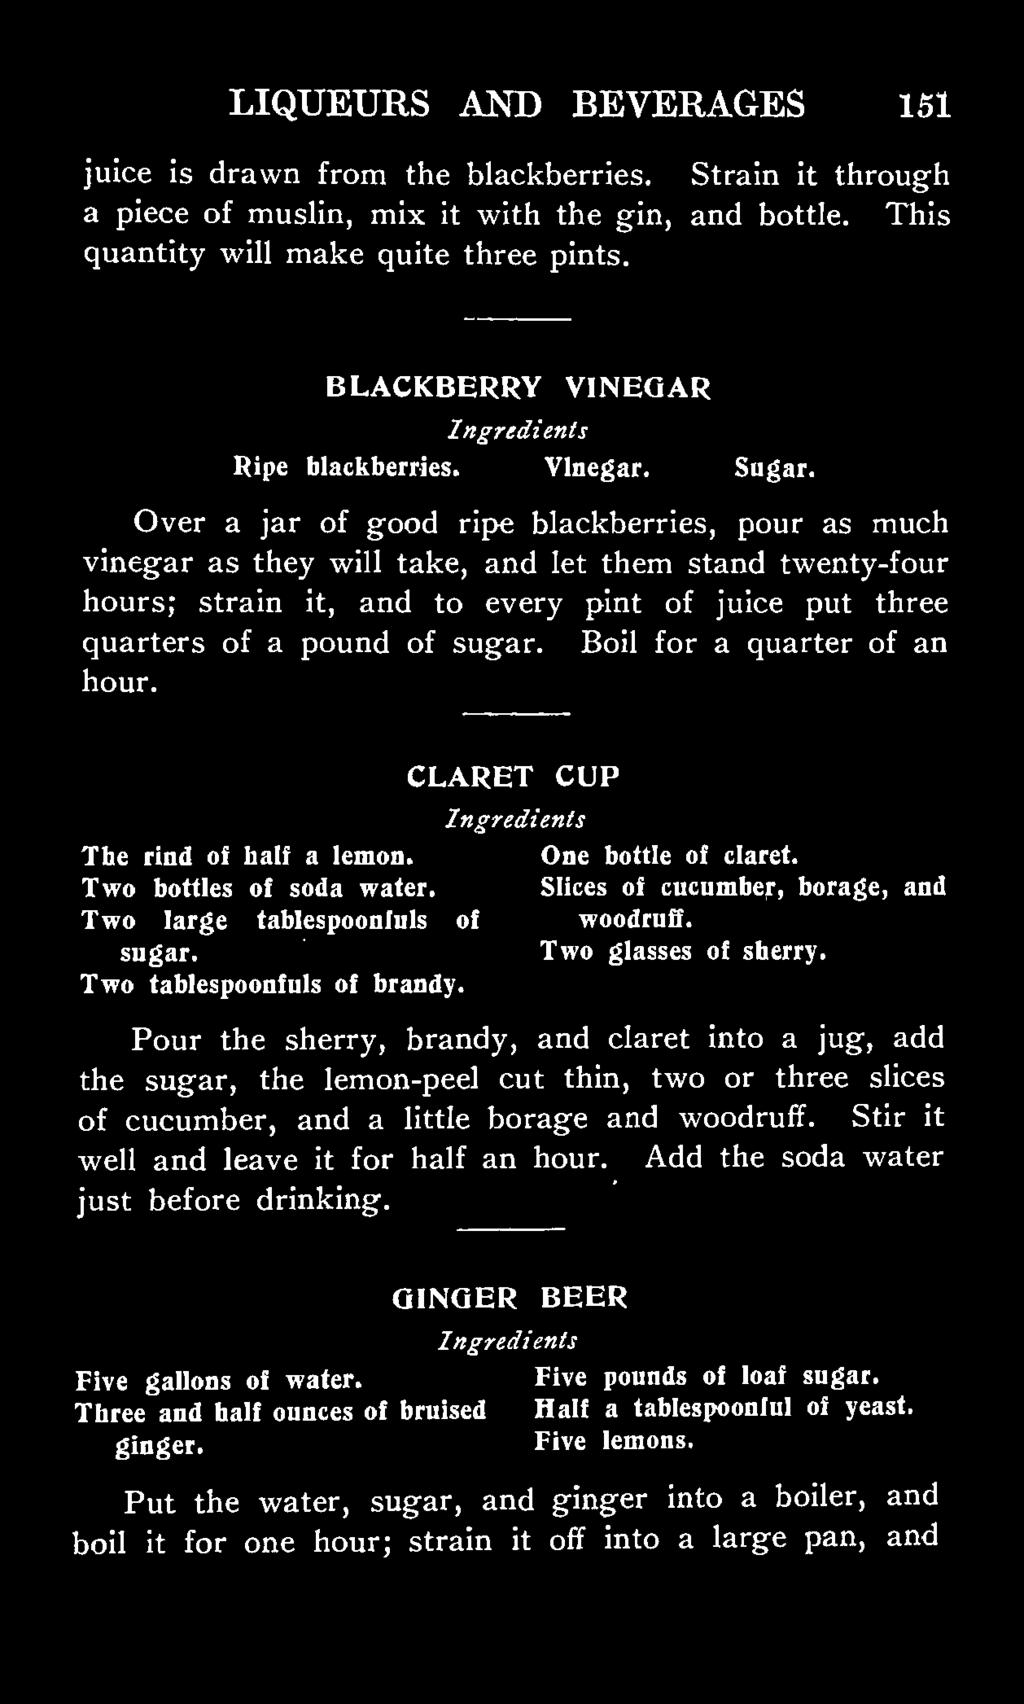 Over a jar of good ripe blackberries, pour as much vinegar as they will take, and let them stand twenty-four hours; strain it, and to every pint of juice put three quarters of a pound of sugar.